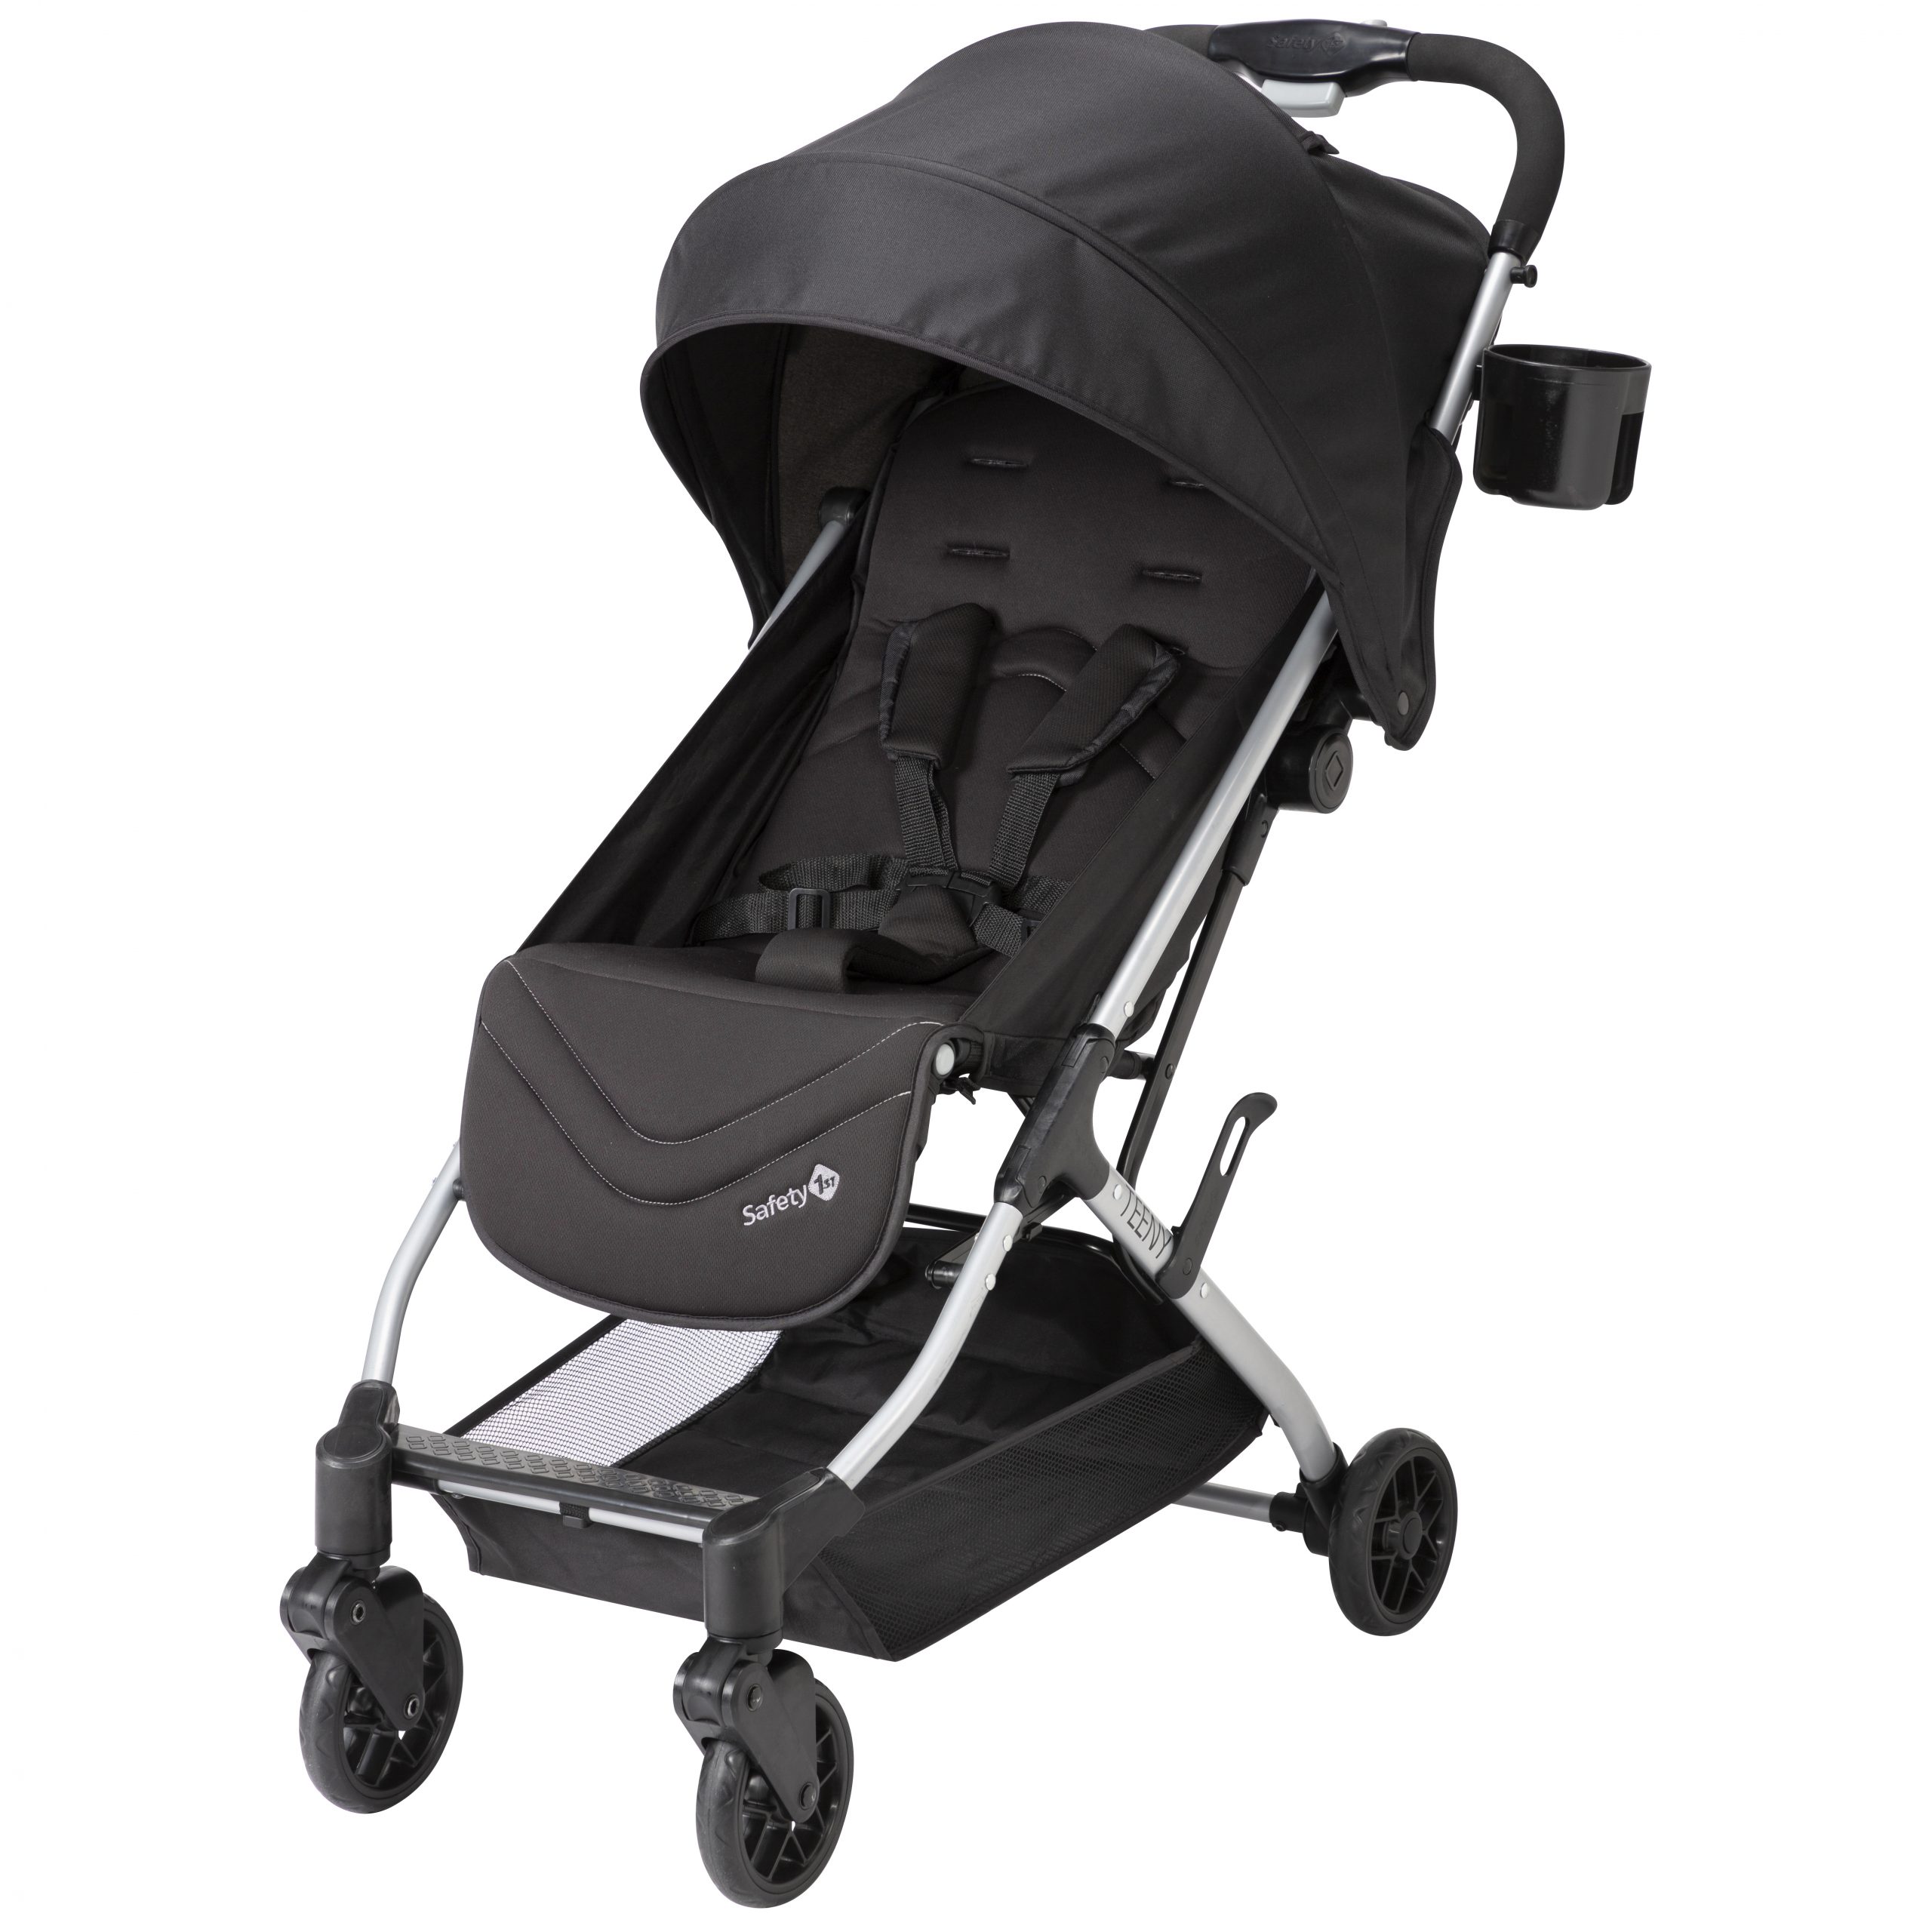 Safety 1st Teeny Ultra Compact Stroller